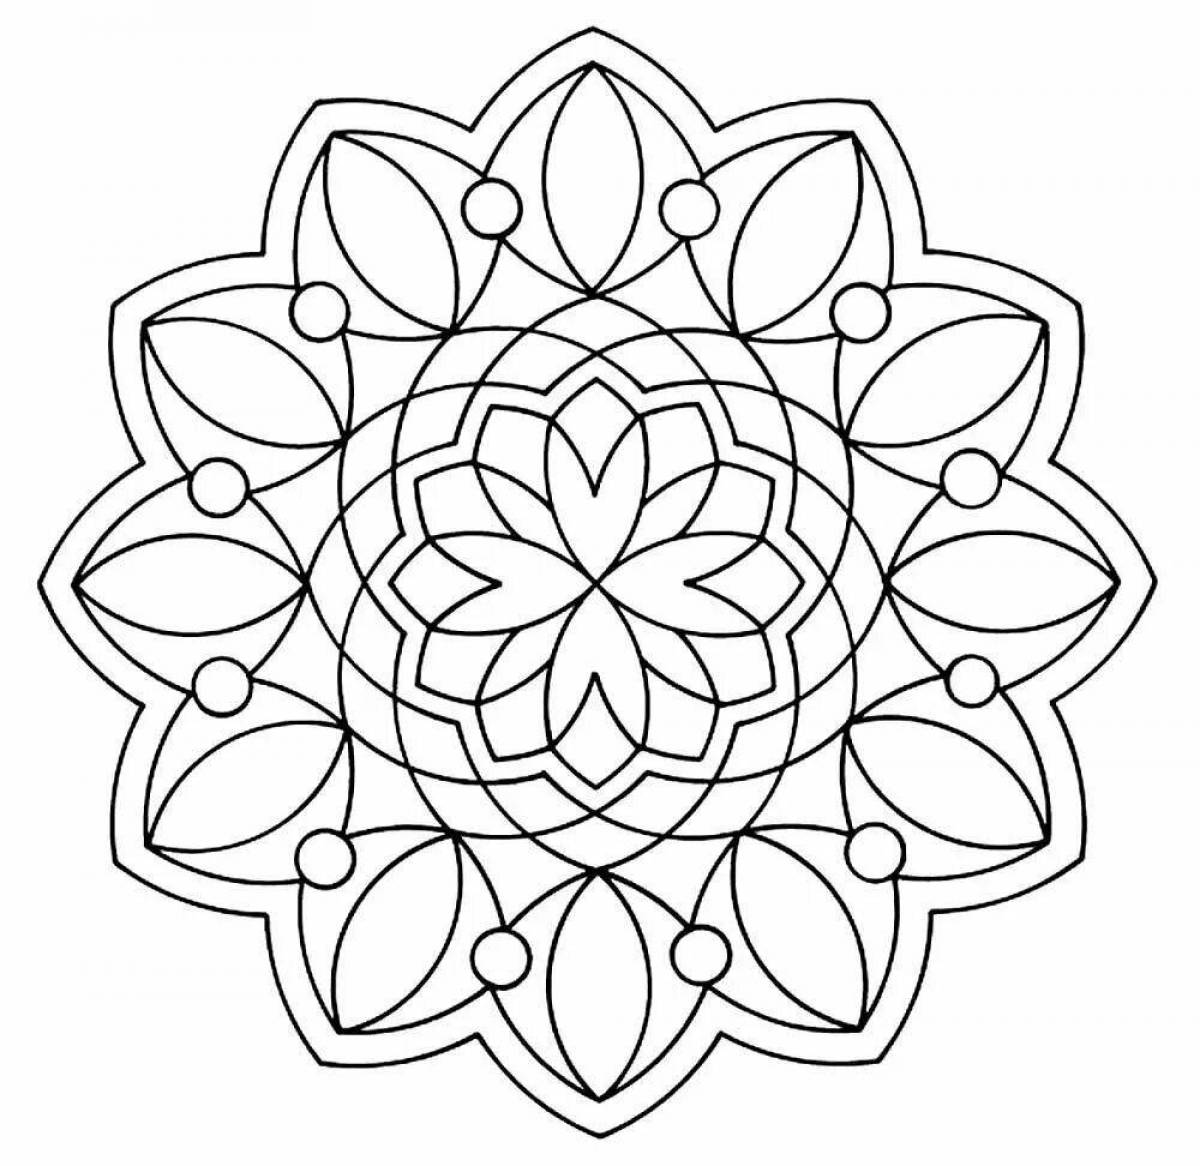 Detailed light pattern coloring page